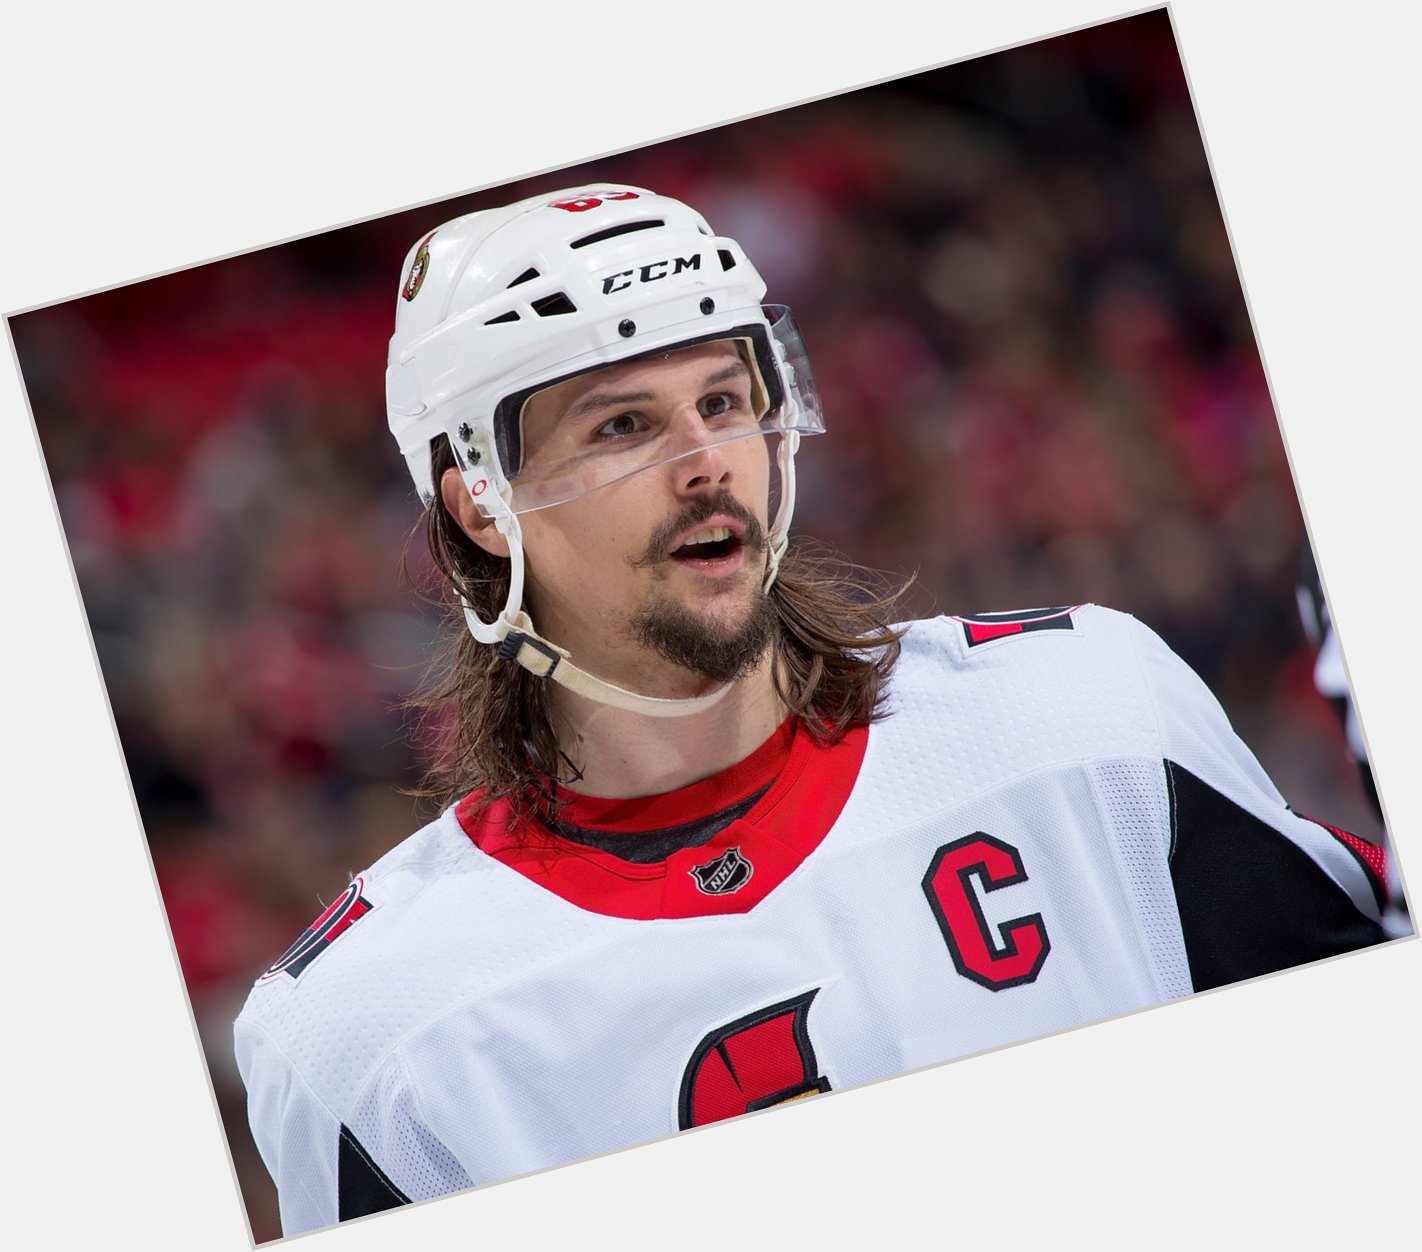 Happy 31st Birthday to the most talented player in history - Erik Karlsson. 